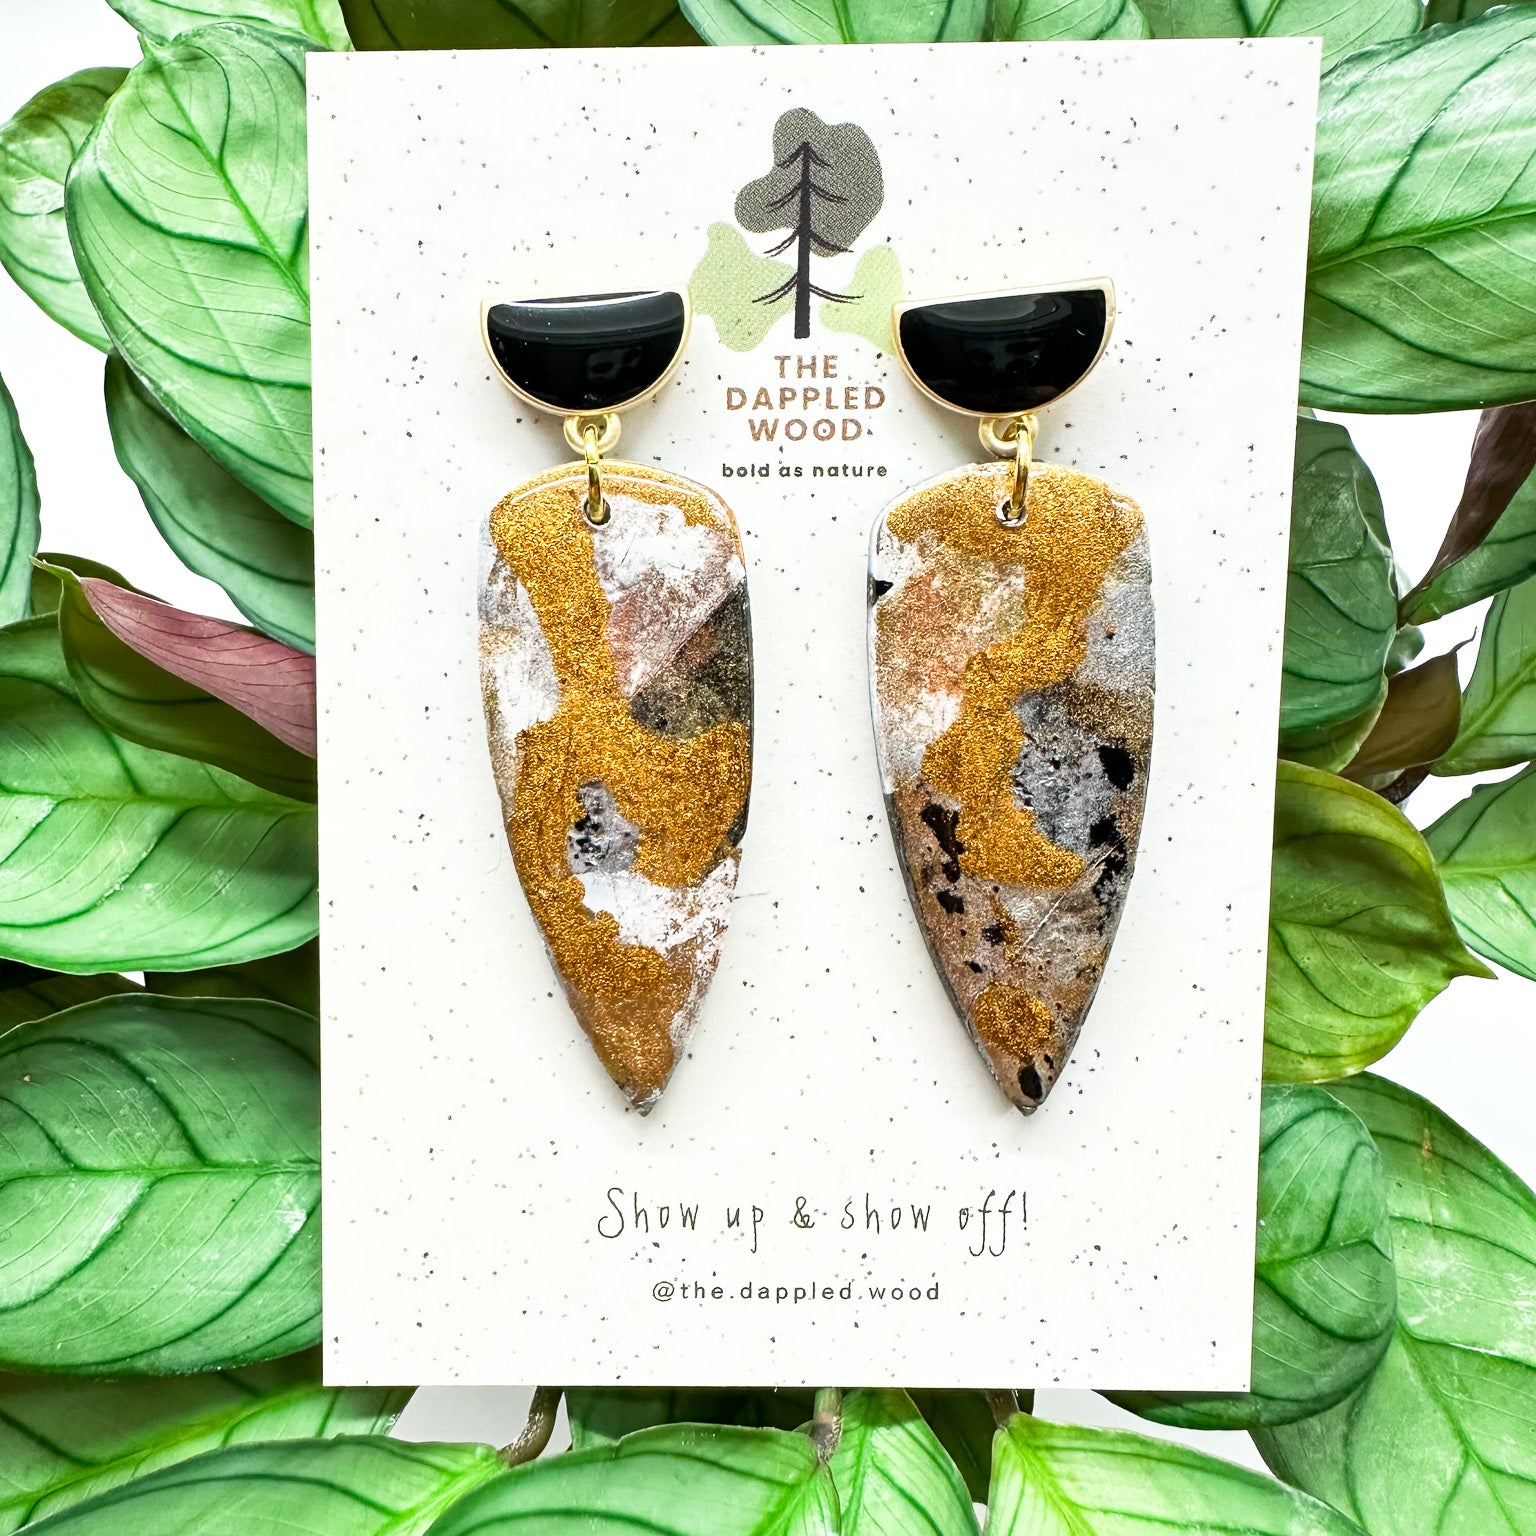 Dagger-shaped metallic coated polymer clay earrings with black and gold half moon posts are displayed on a speckled card with The Dappled Wood branding, midst vibrant green leaves.